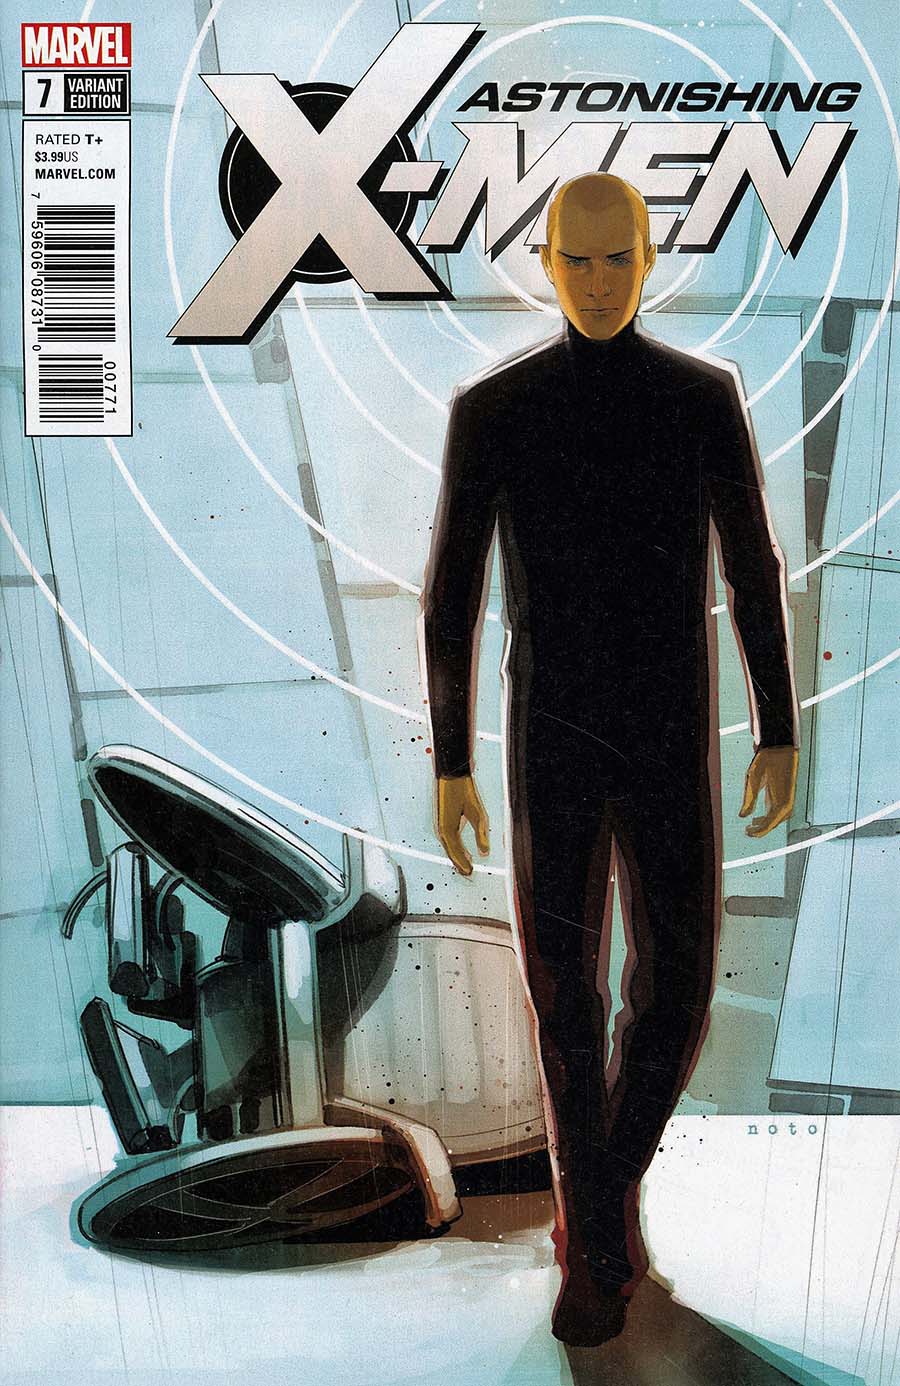 Astonishing X-Men Vol 4 #7 Cover G Incentive Phil Noto Variant Cover (Marvel Legacy Tie-In)